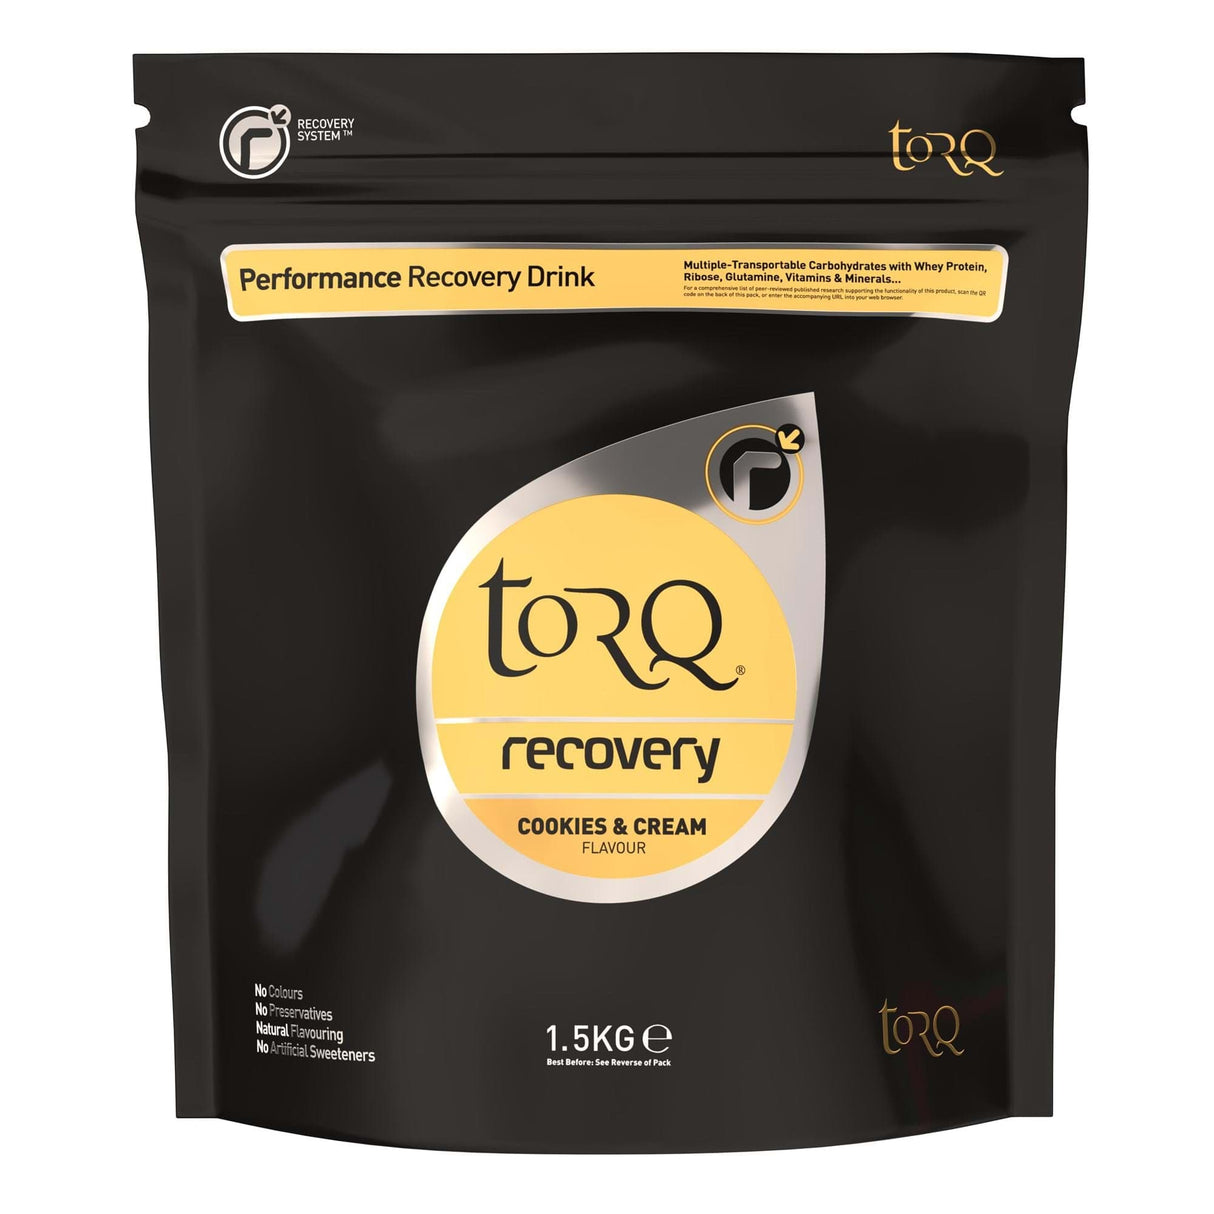 Torq Recovery Drink (1 X 1.5Kg): Cookies & Cream